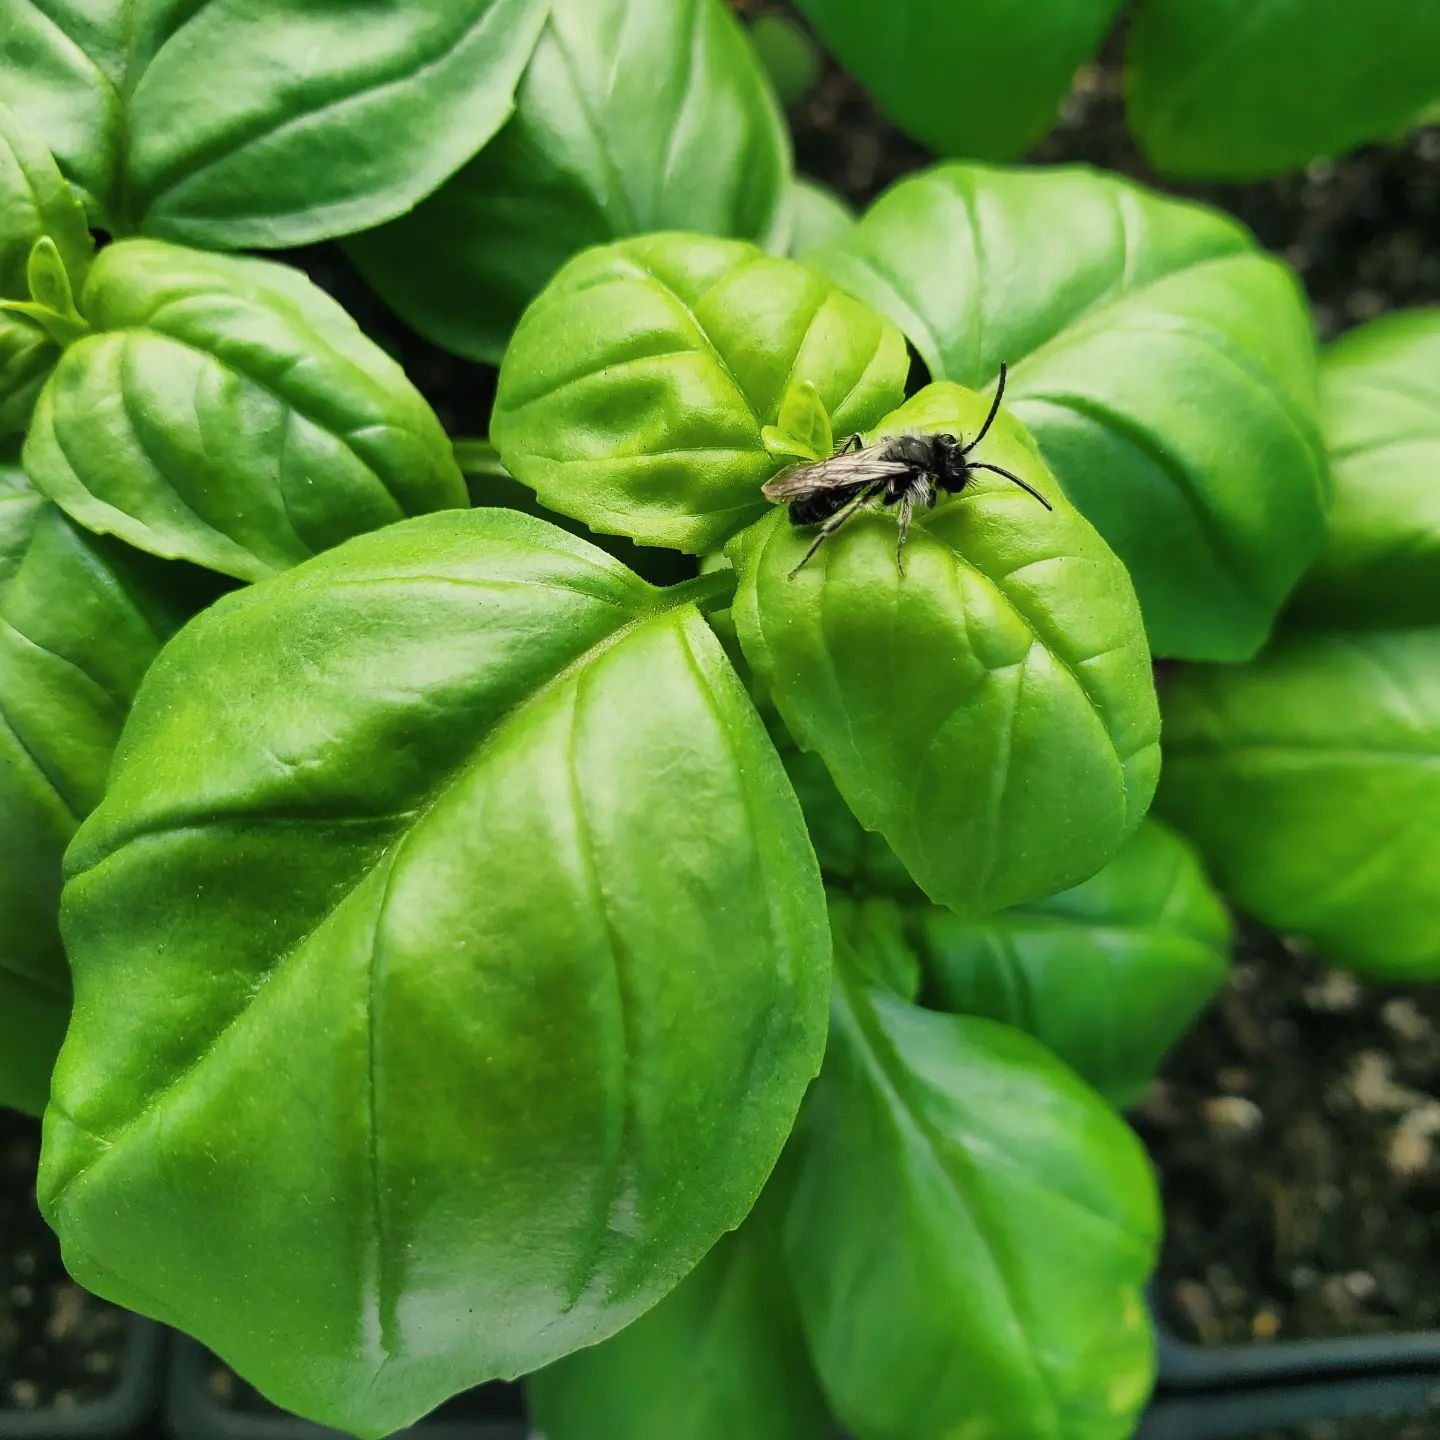 Lots of basil headed out to Corvallis and Eugene retailers this week and it is extra luscious!!
Just be sure to protect cold-sensitive plants like these from chilly nights this month- they want it warm and cozy inside a cloche, cold frame, or greenho